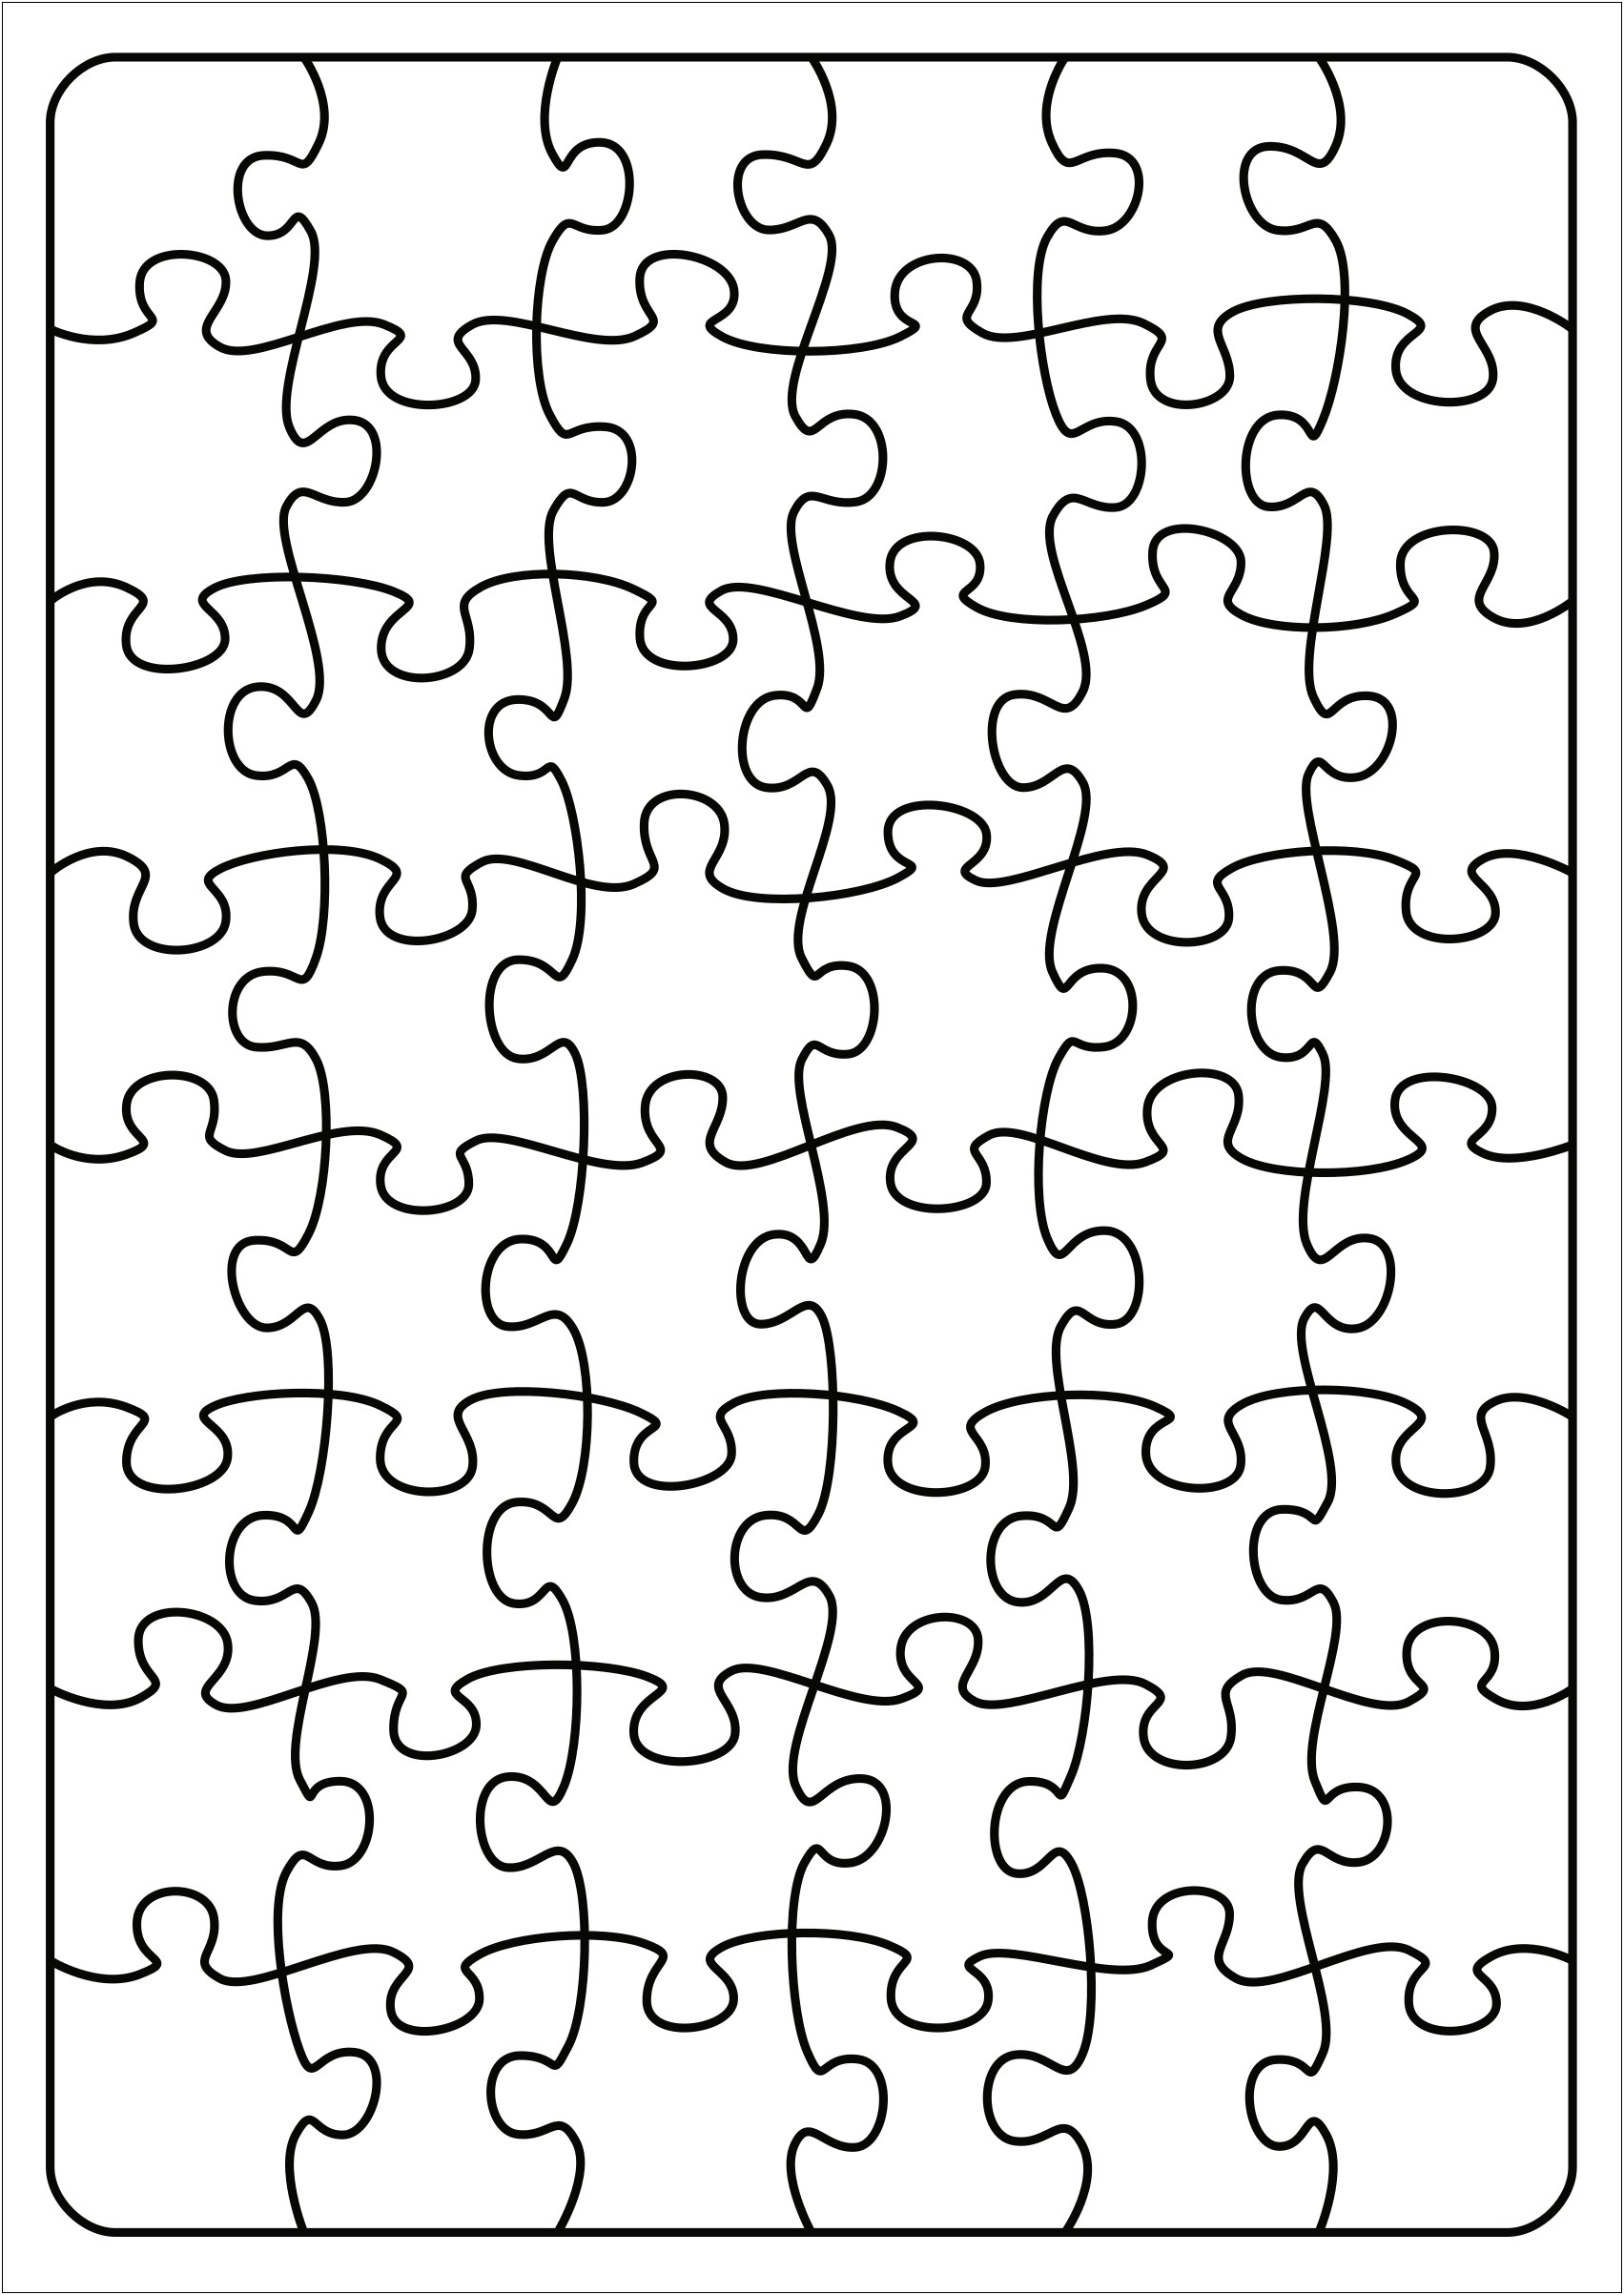 Free 20 Piece Jigsaw Puzzle Template